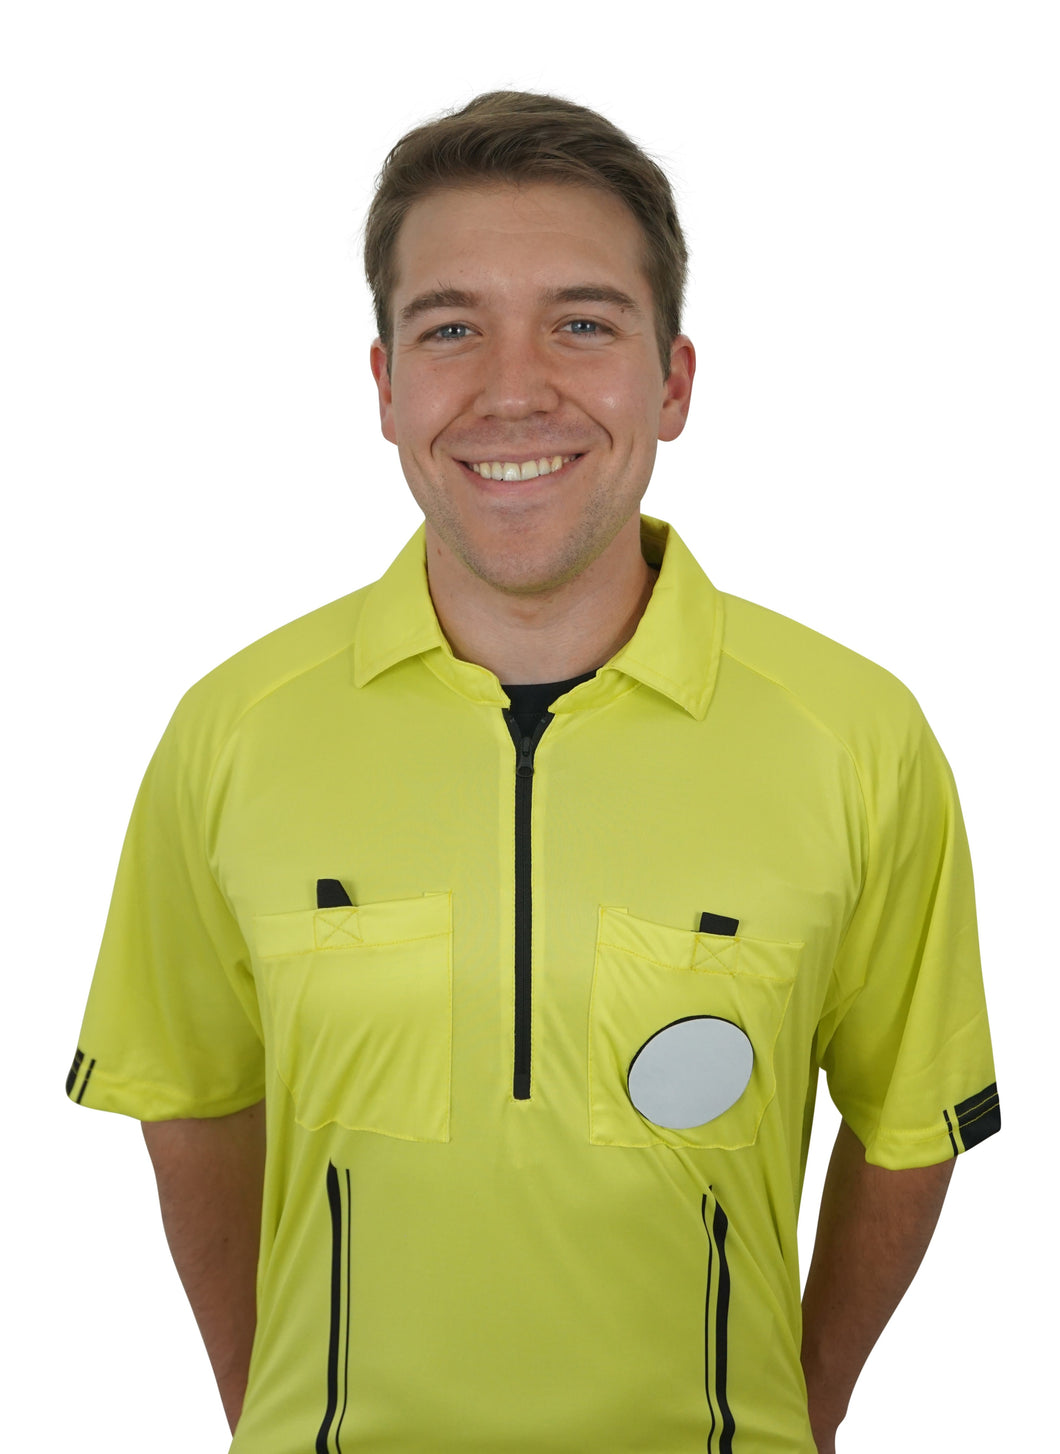 YELLOW New USSF Pro Soccer Referee Jersey